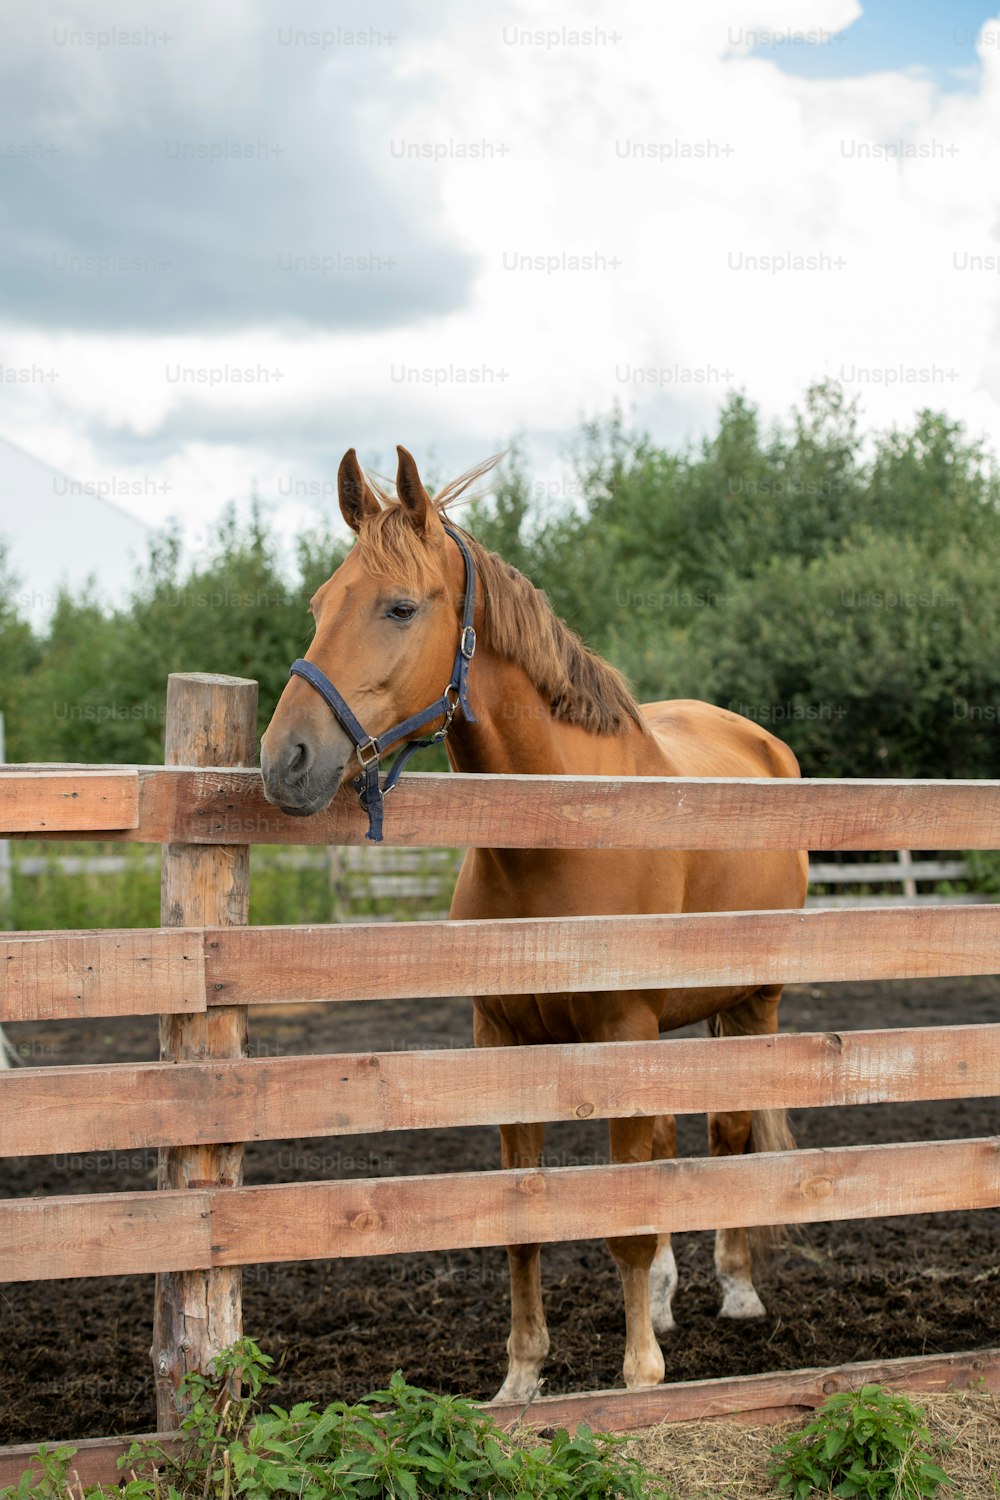 Young healthy brown purebred mare standing behind wooden fence while chilling in rural environment over cloudy sky